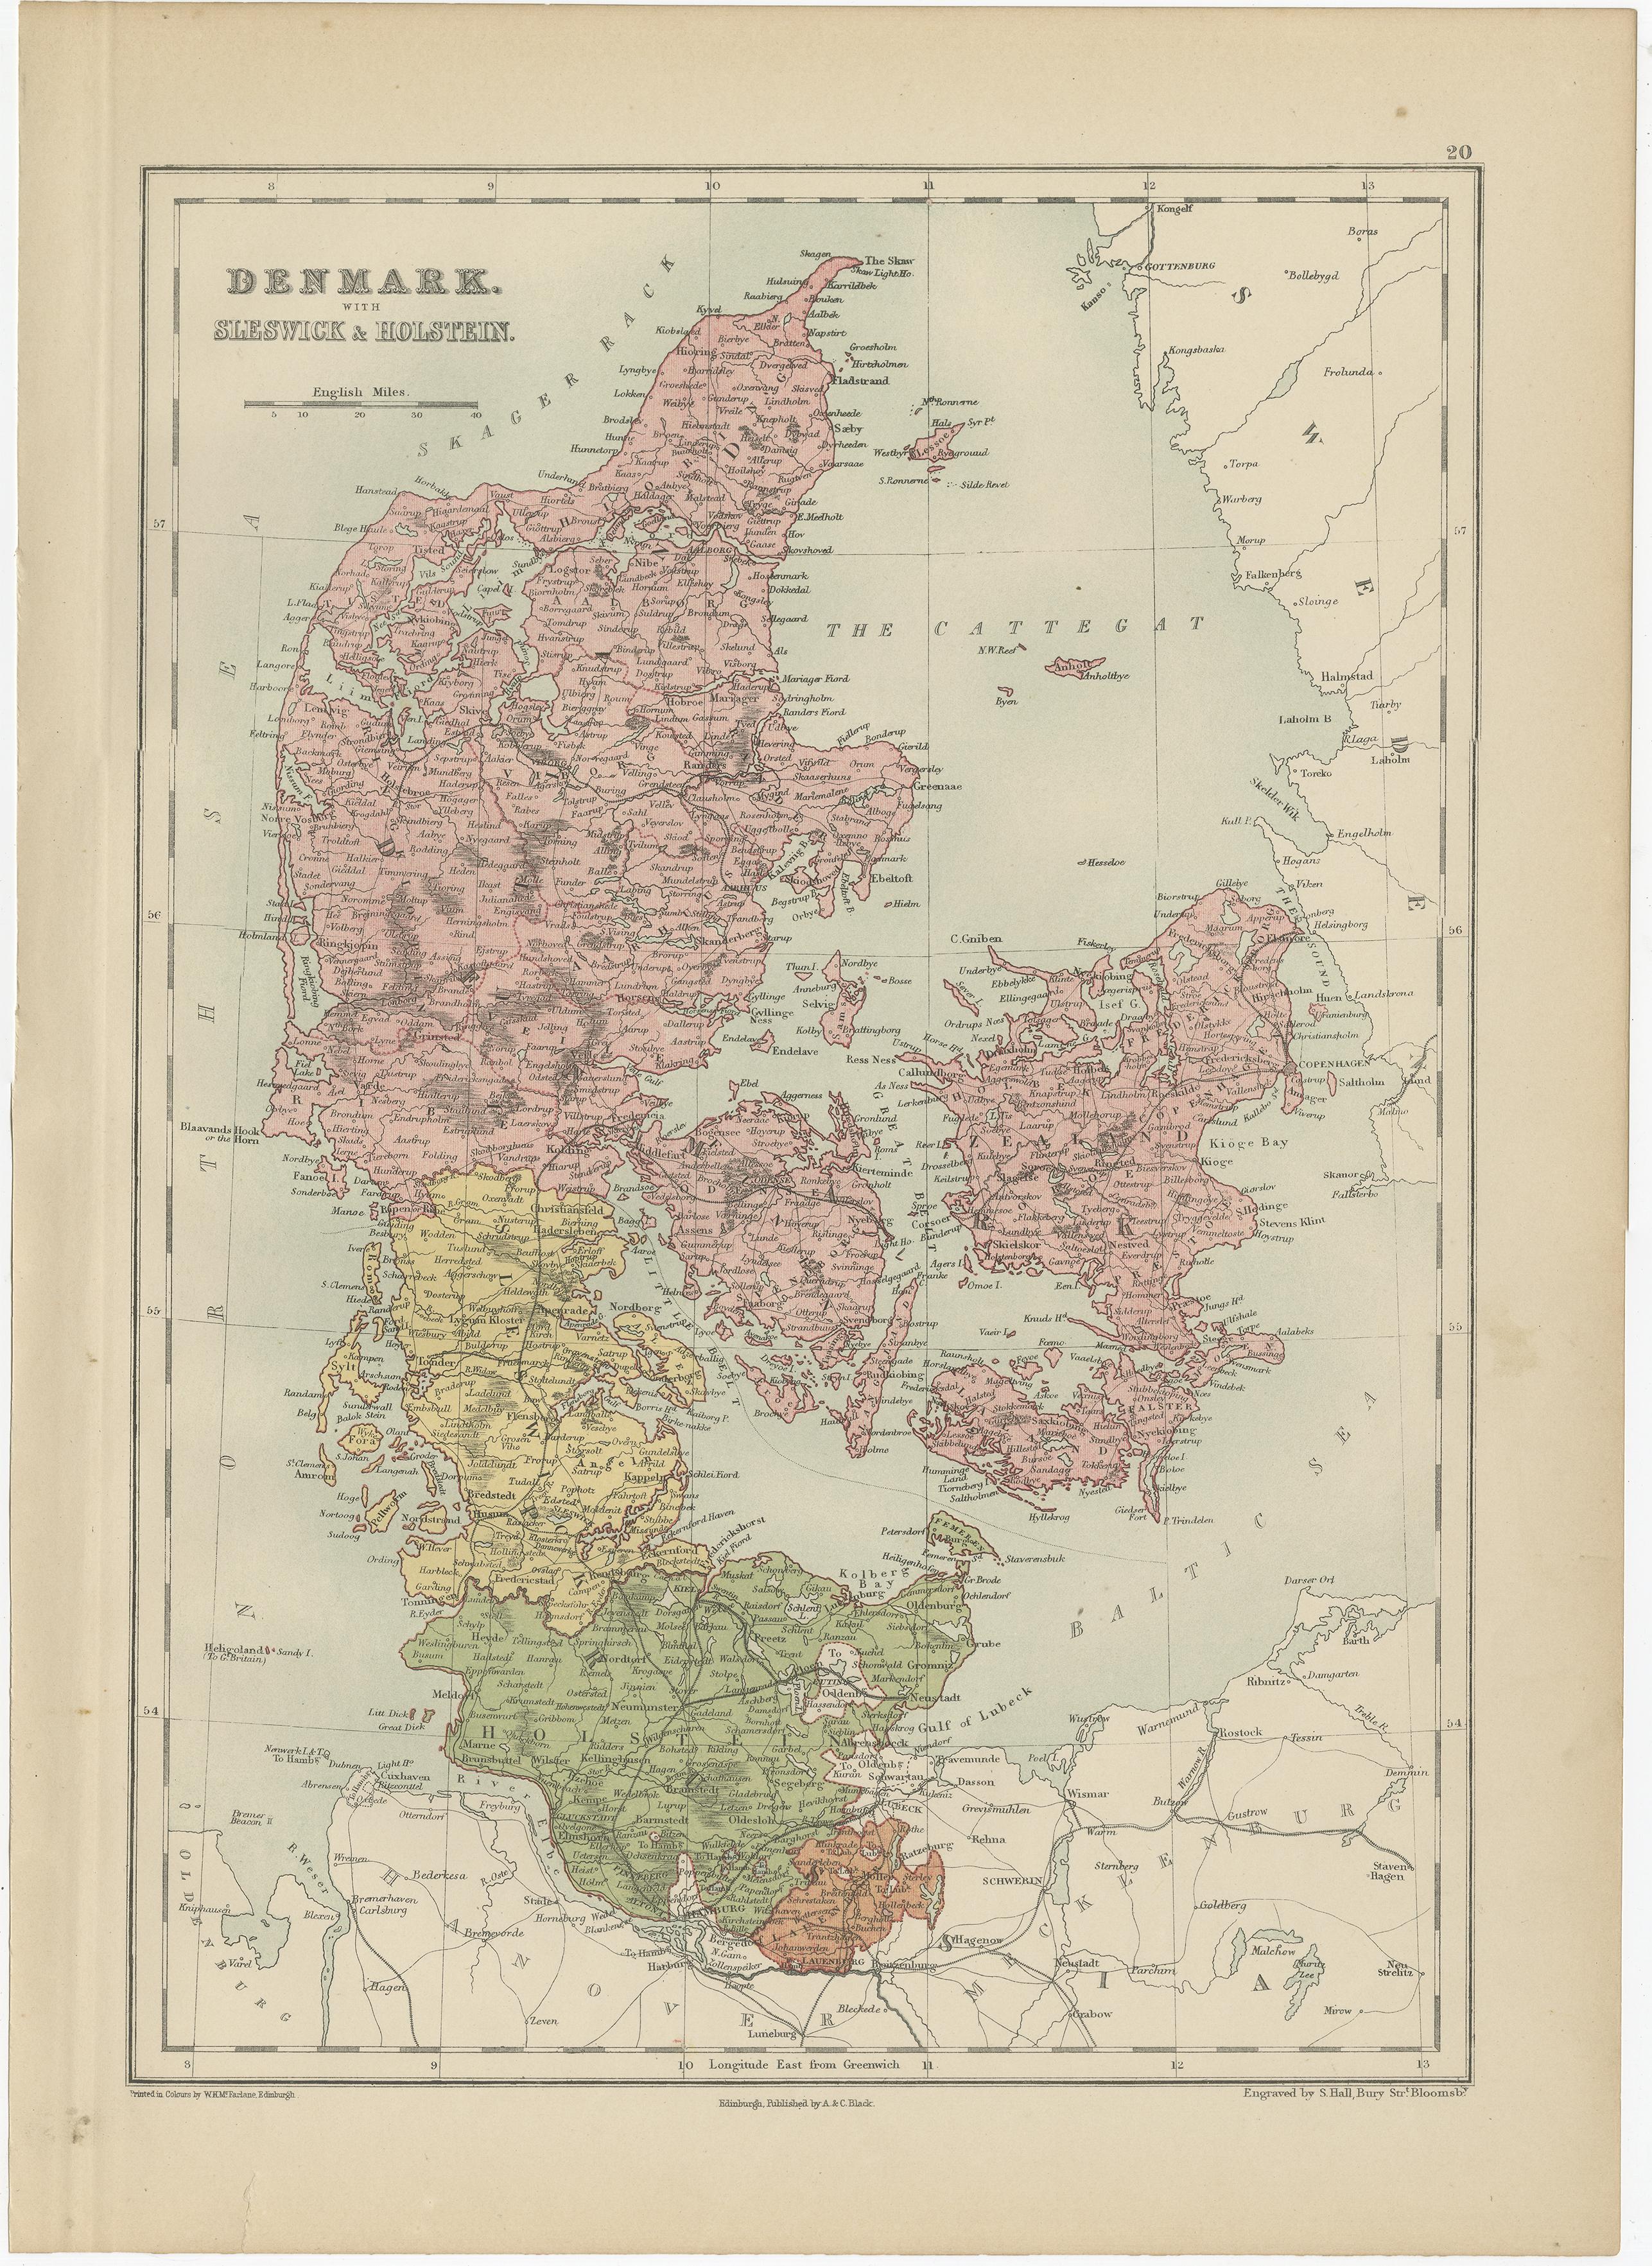 Antique map titled 'Denmark with Schleswig & Holstein'. Original antique map of Denmark with Schleswig & Holstein. This map originates from ‘Black's General Atlas of The World’. Published by A & C. Black, 1870.